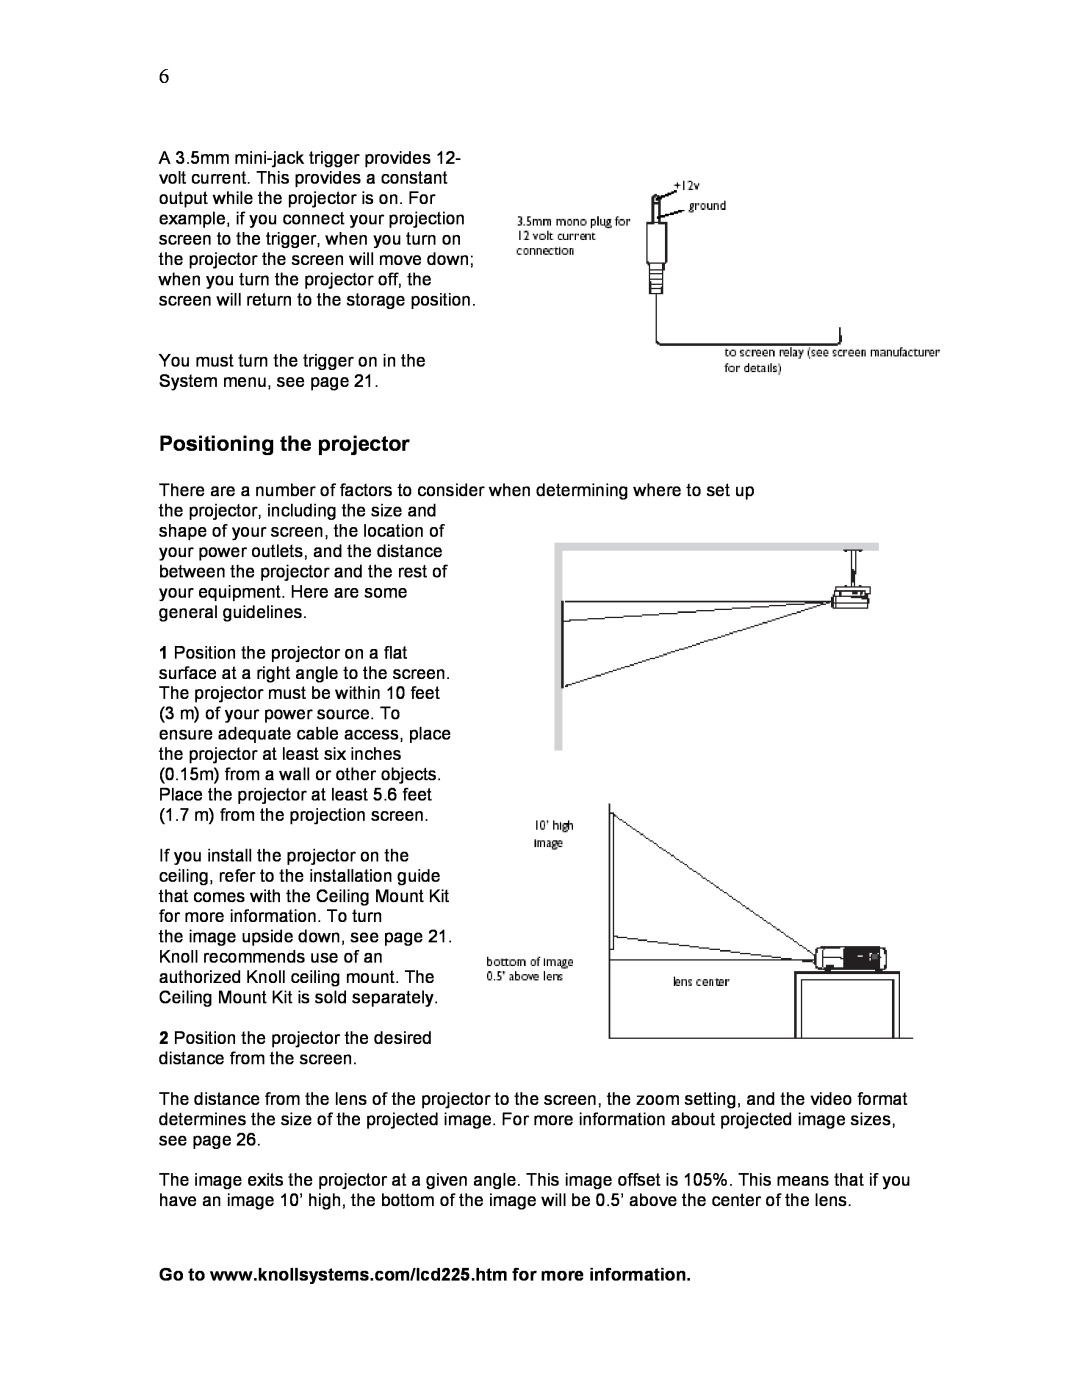 Knoll Systems HD225 user manual Positioning the projector 